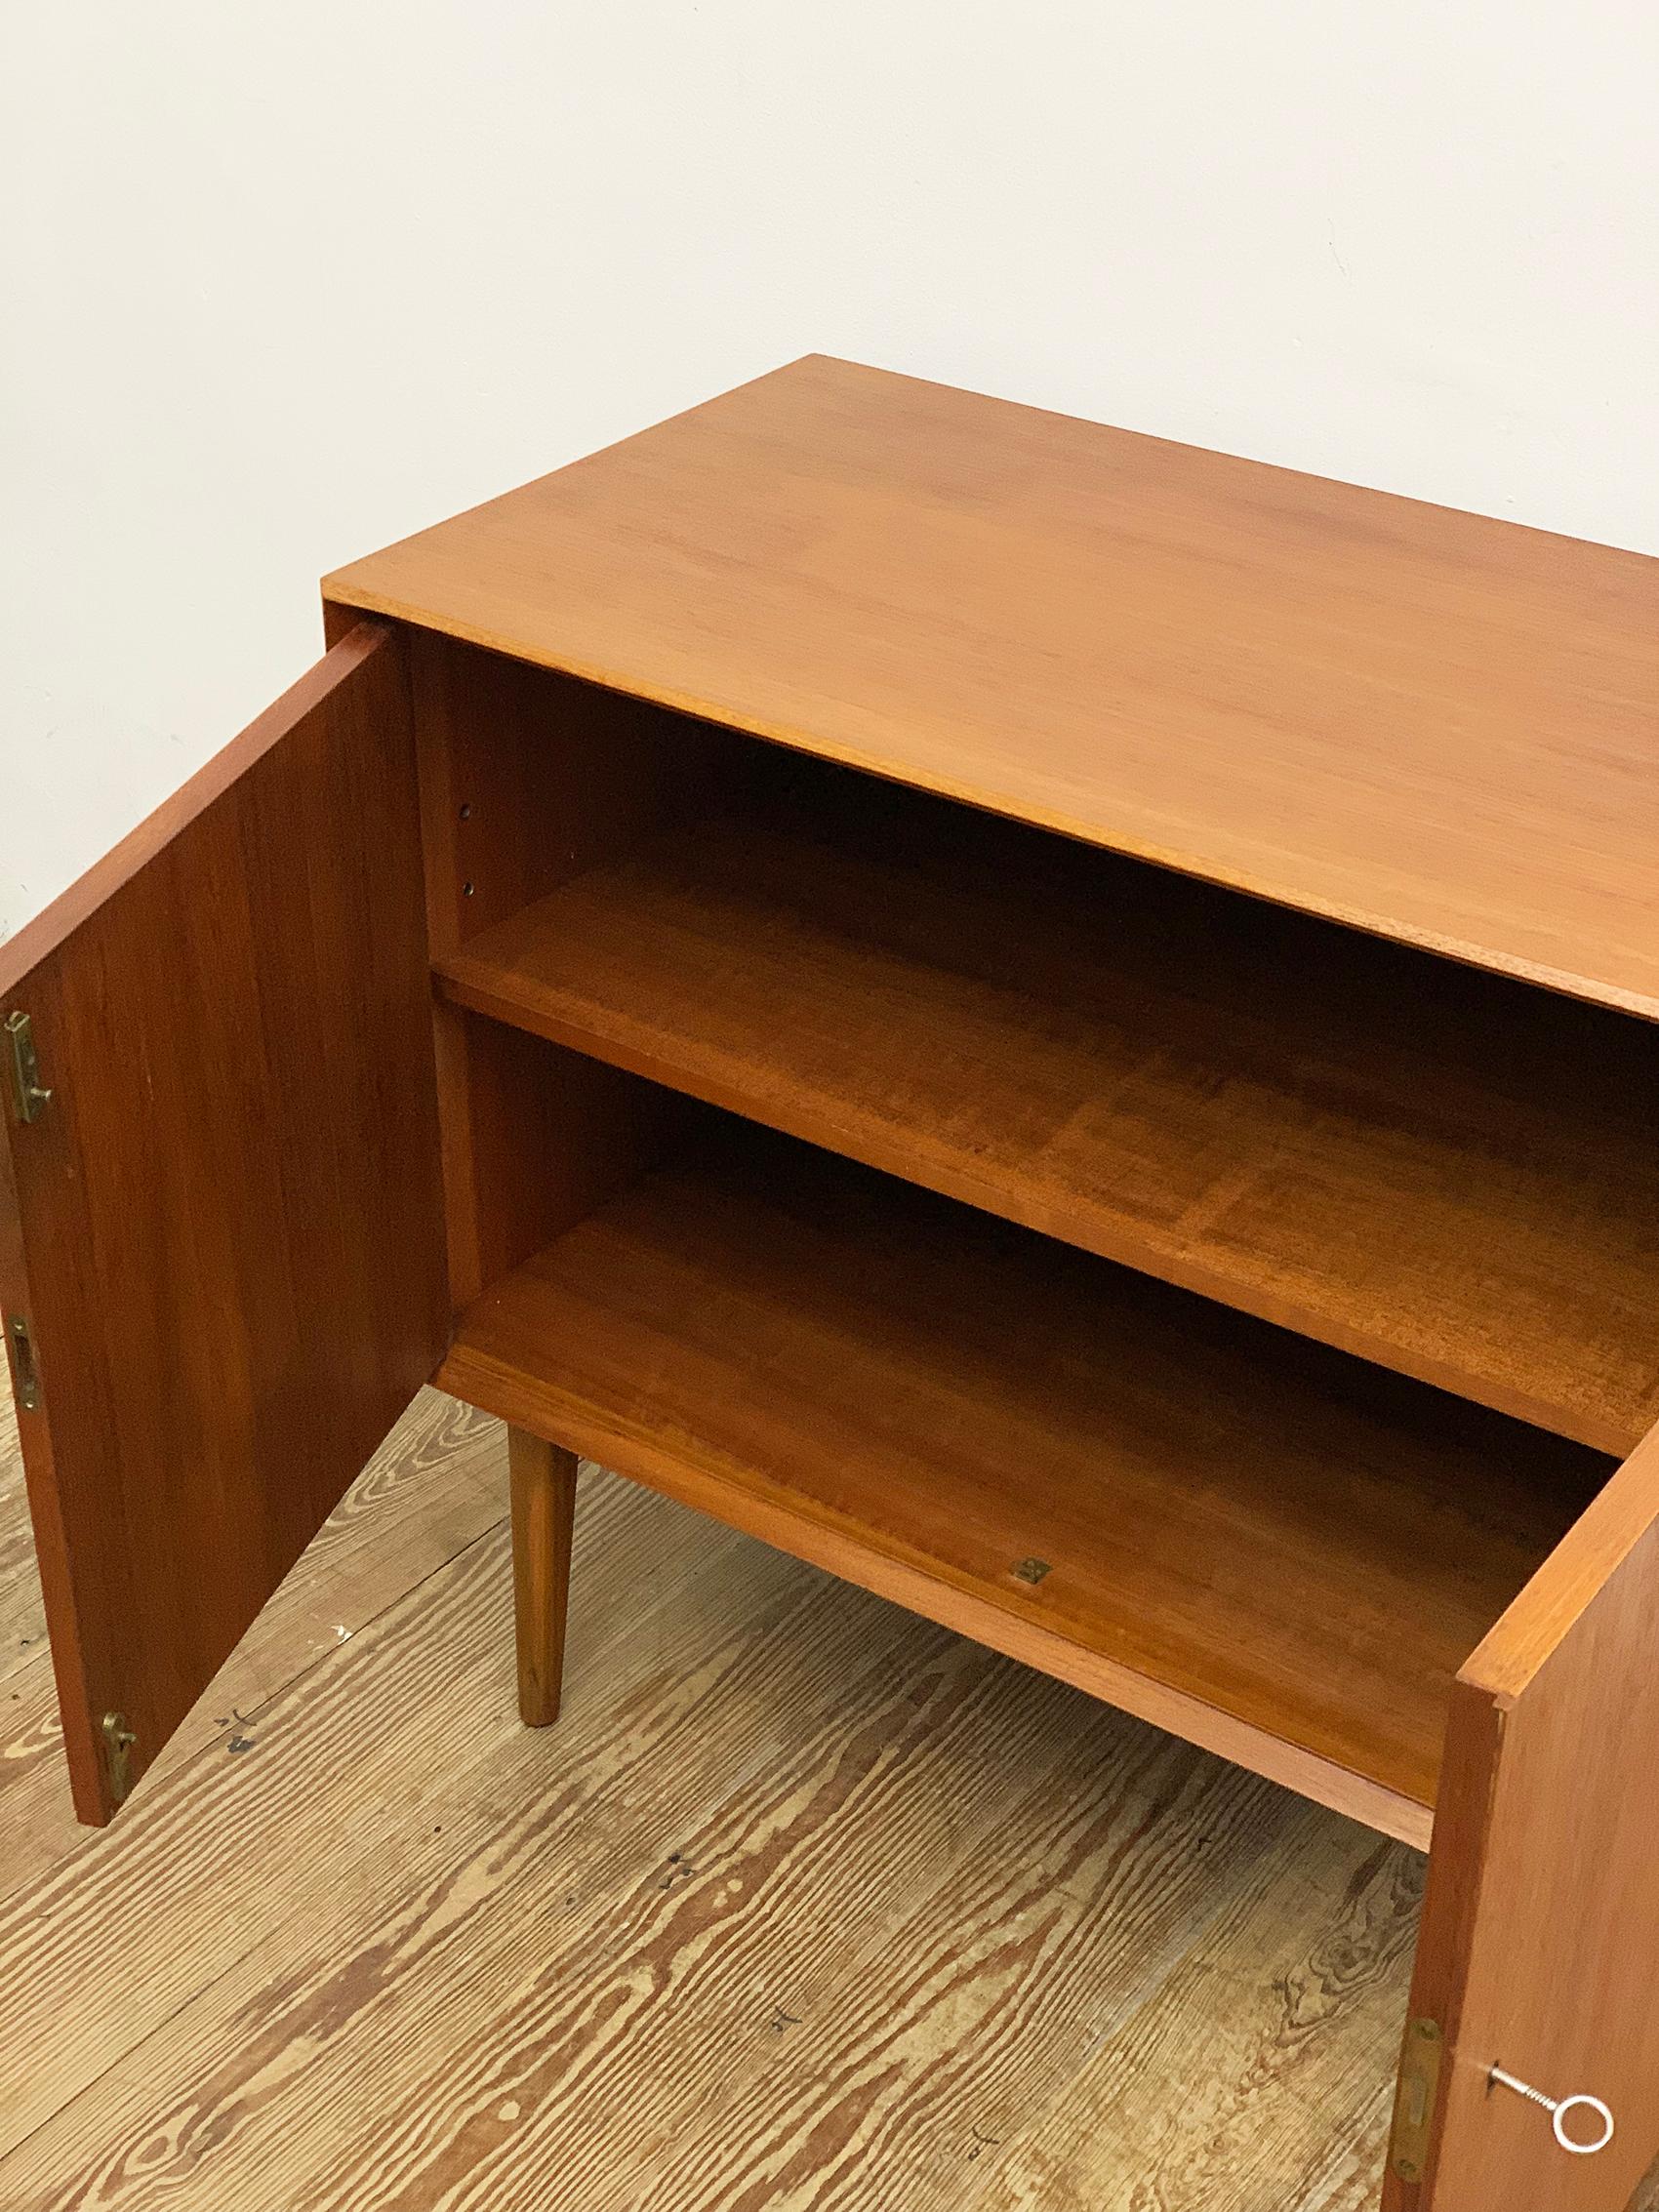 Small Mid-Century Sideboard in Teak by Rex Raab for Wilhelm Renz, Germany, 1960s For Sale 6